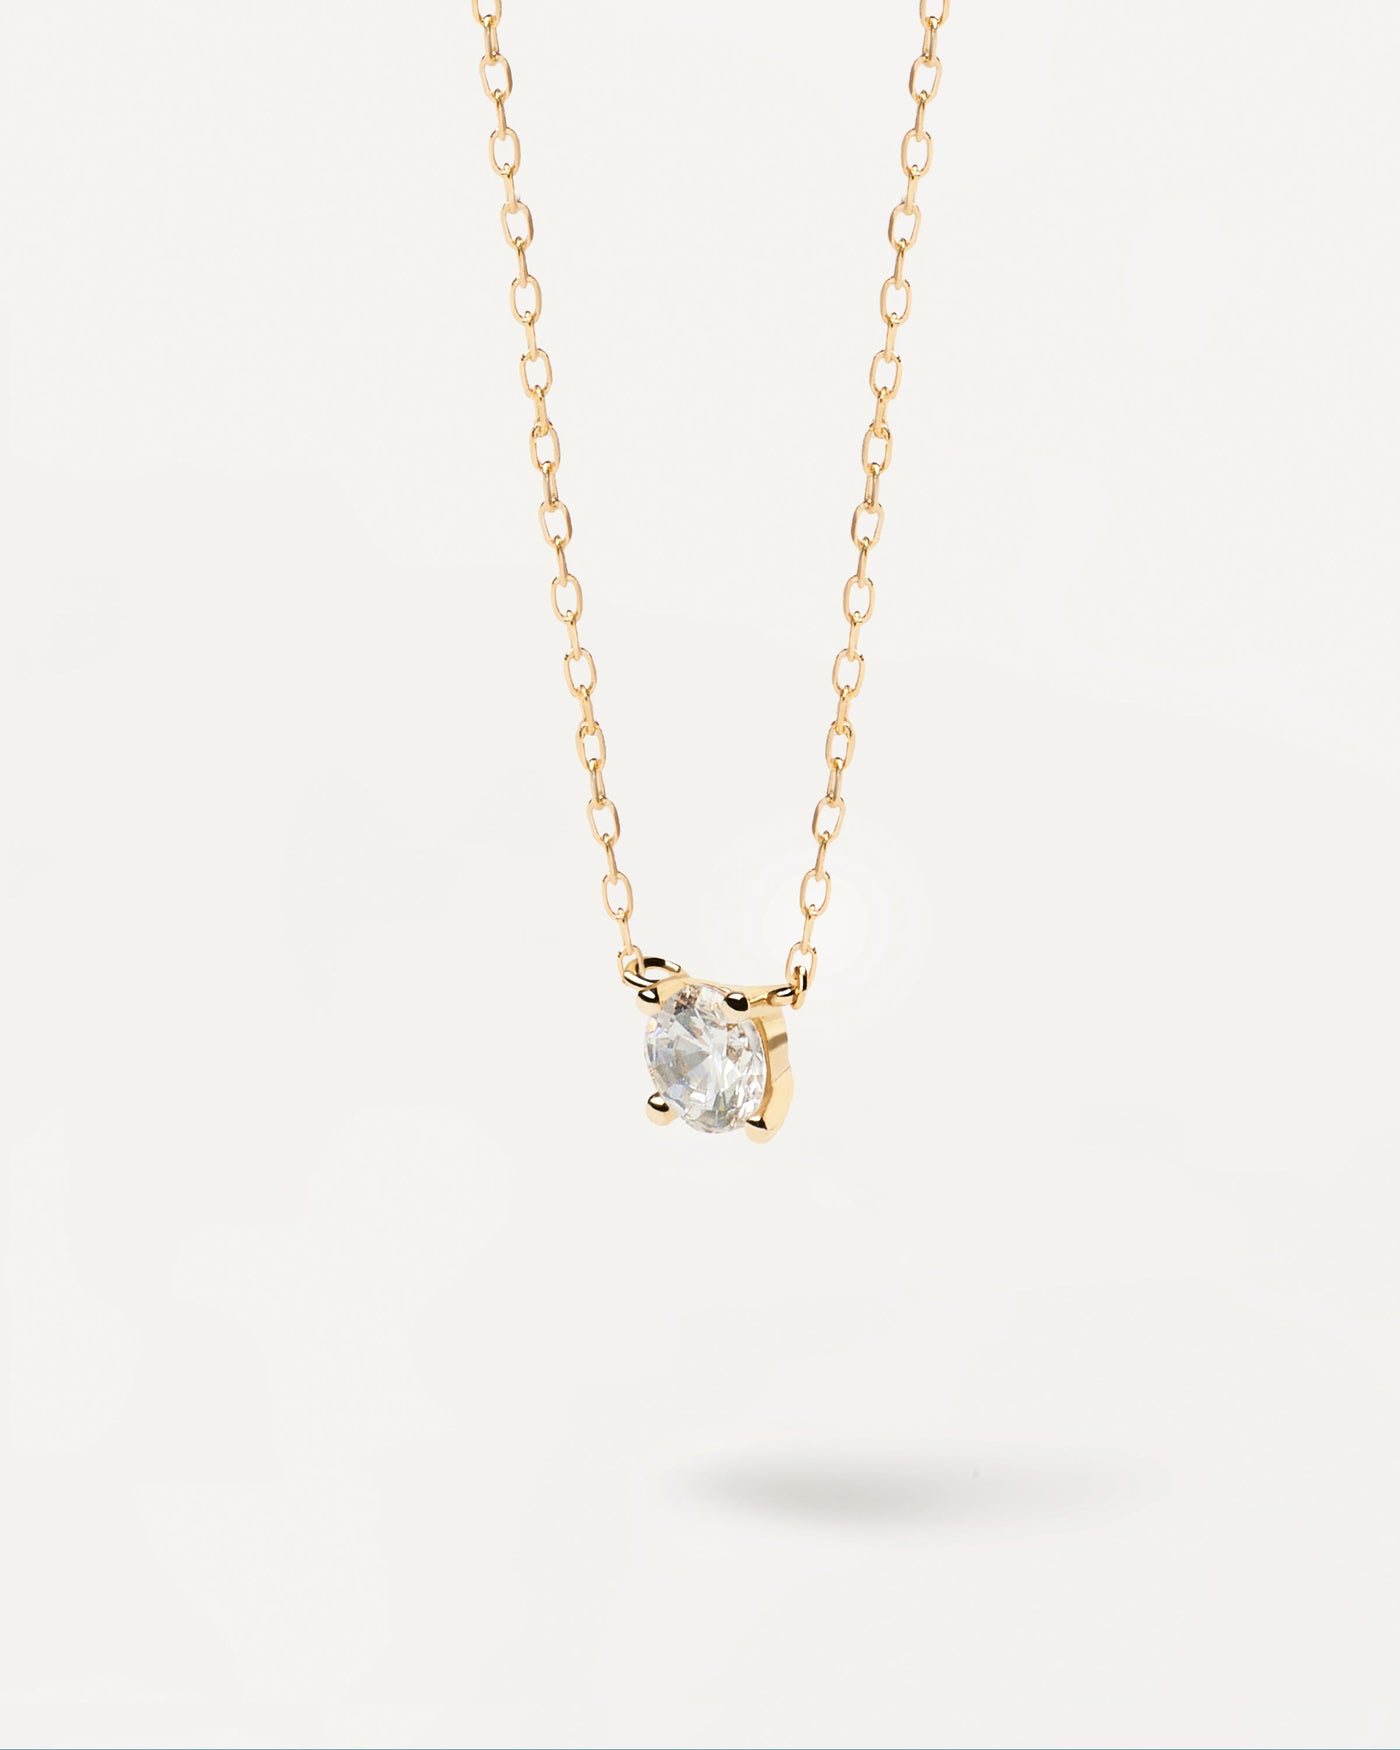 2023 Selection | Diamonds and Gold Solitaire Medium Necklace. Solid yellow gold chain necklace with fine round lab-grown diamond of 0.20 carats. Get the latest arrival from PDPAOLA. Place your order safely and get this Best Seller. Free Shipping.